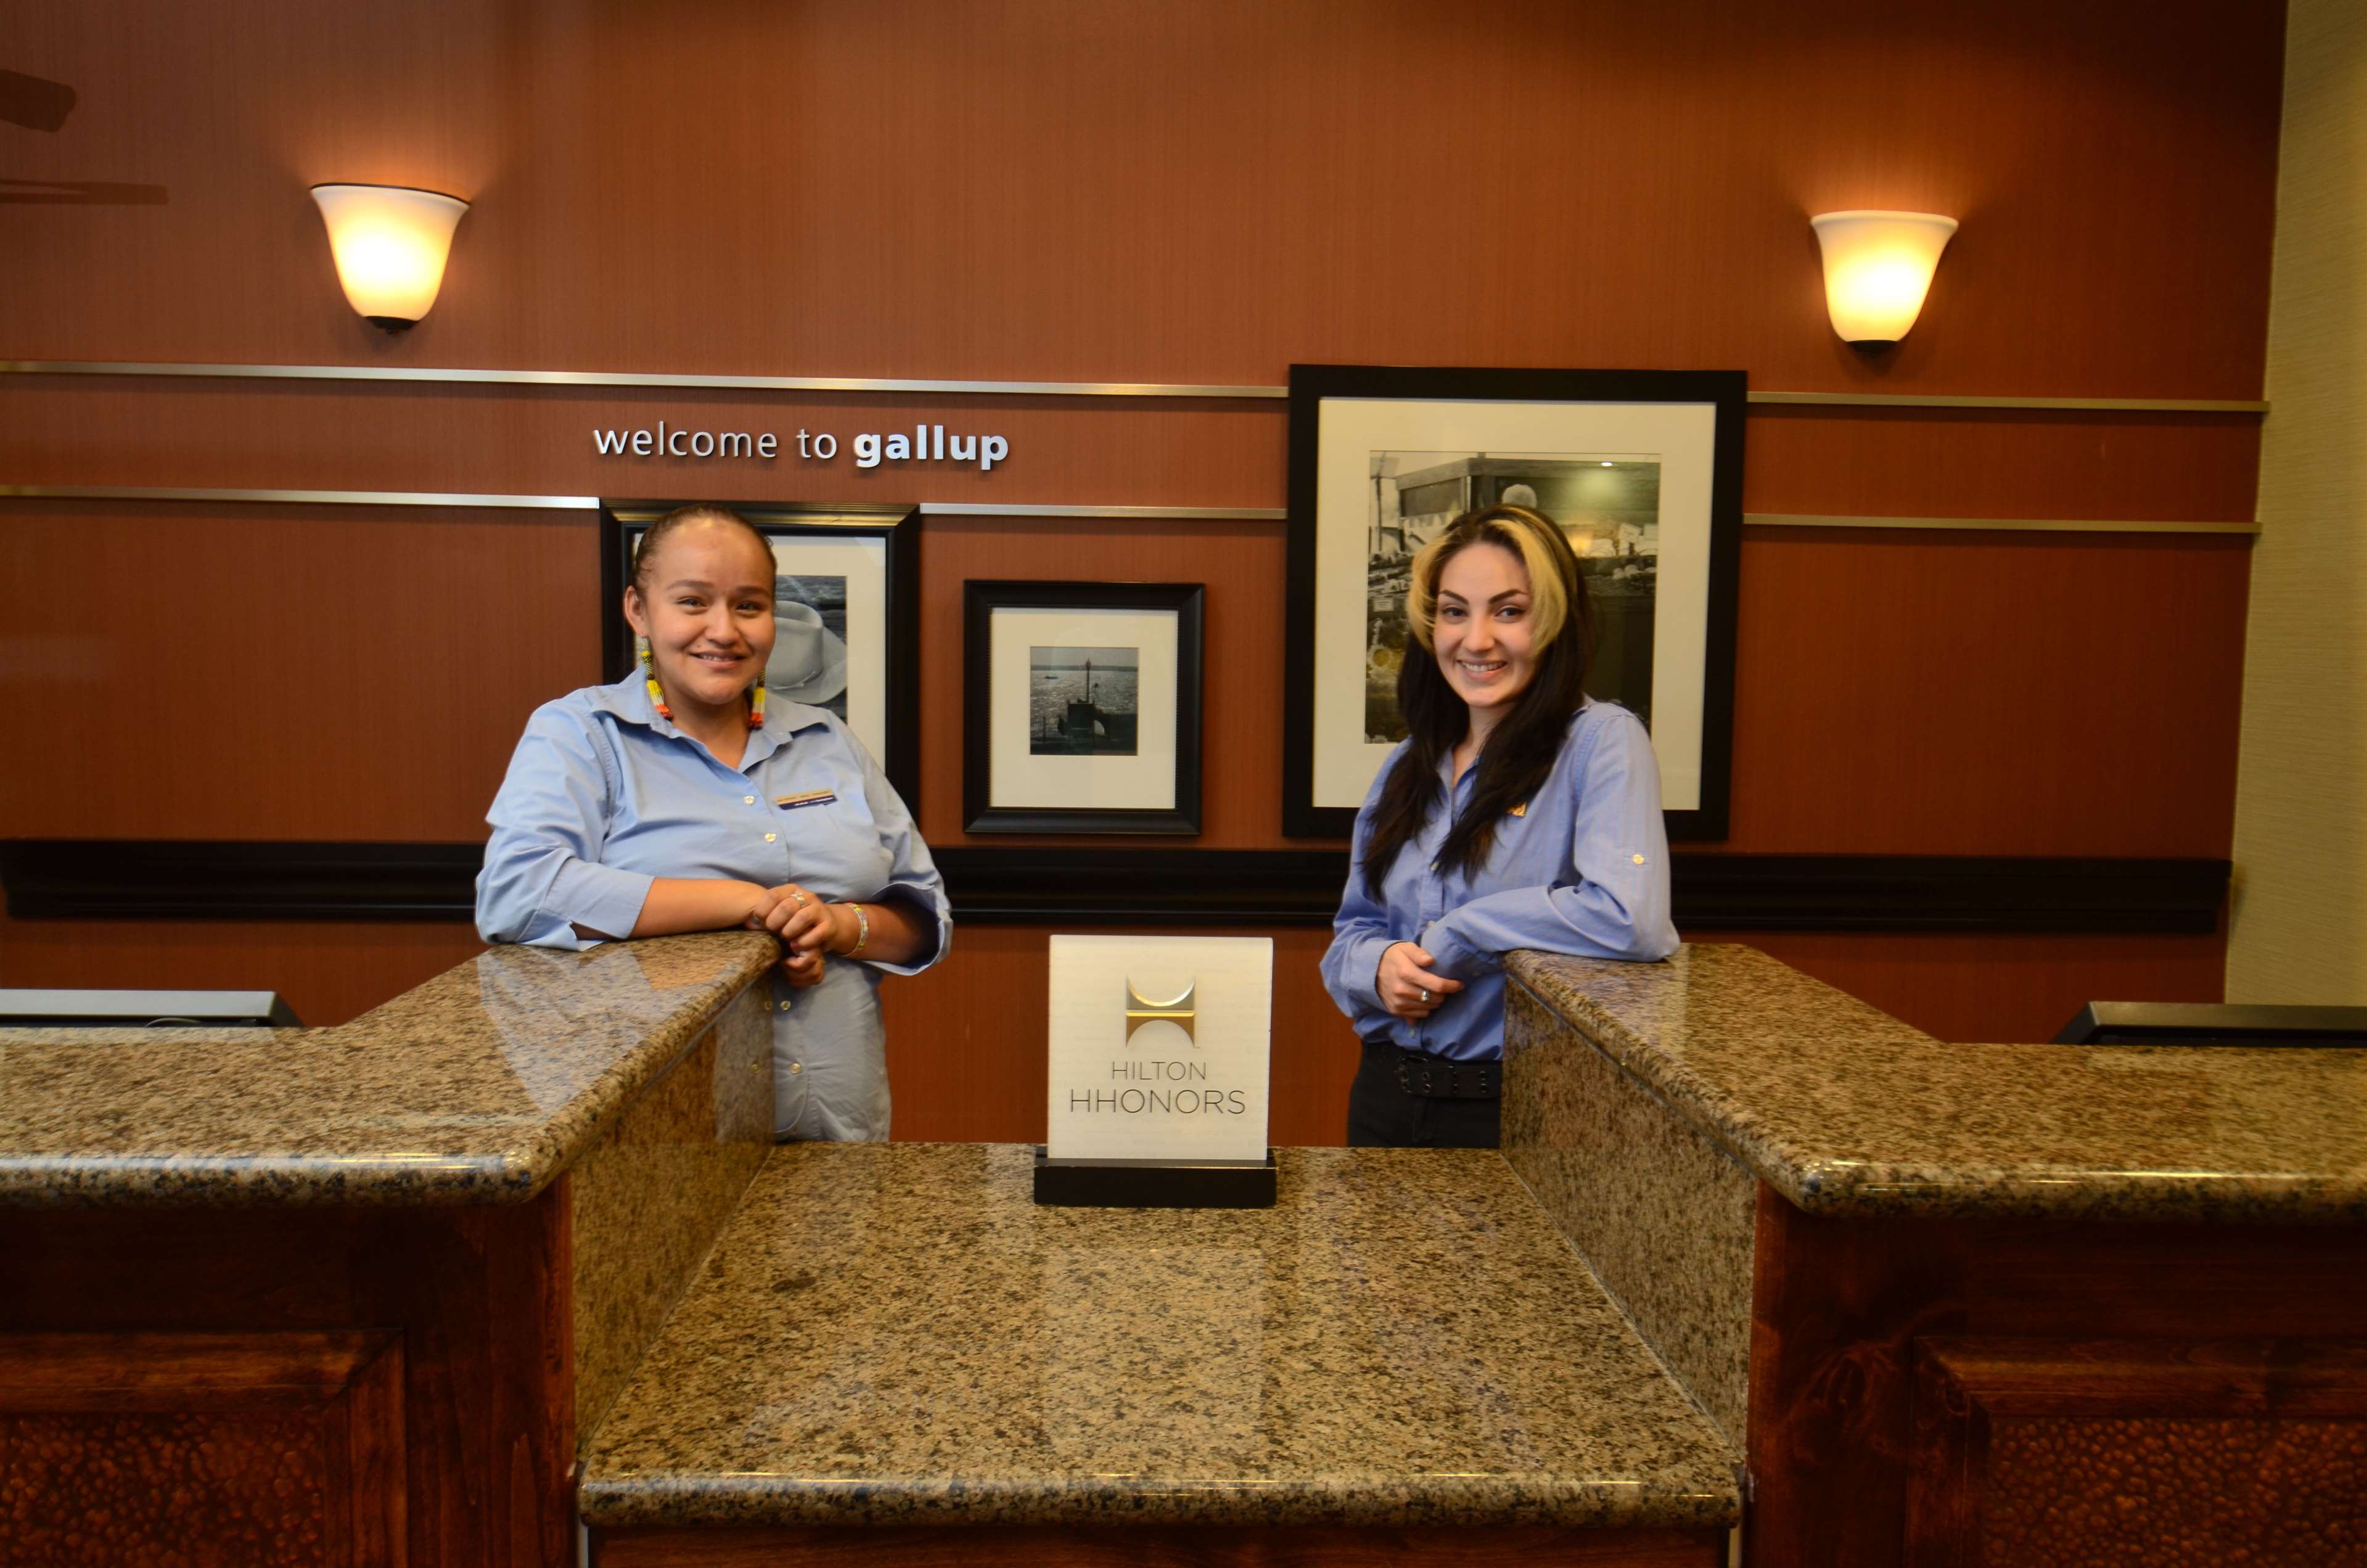 Photos & Pictures for Hampton Inn & Suites Gallup in Gallup, NM 873...